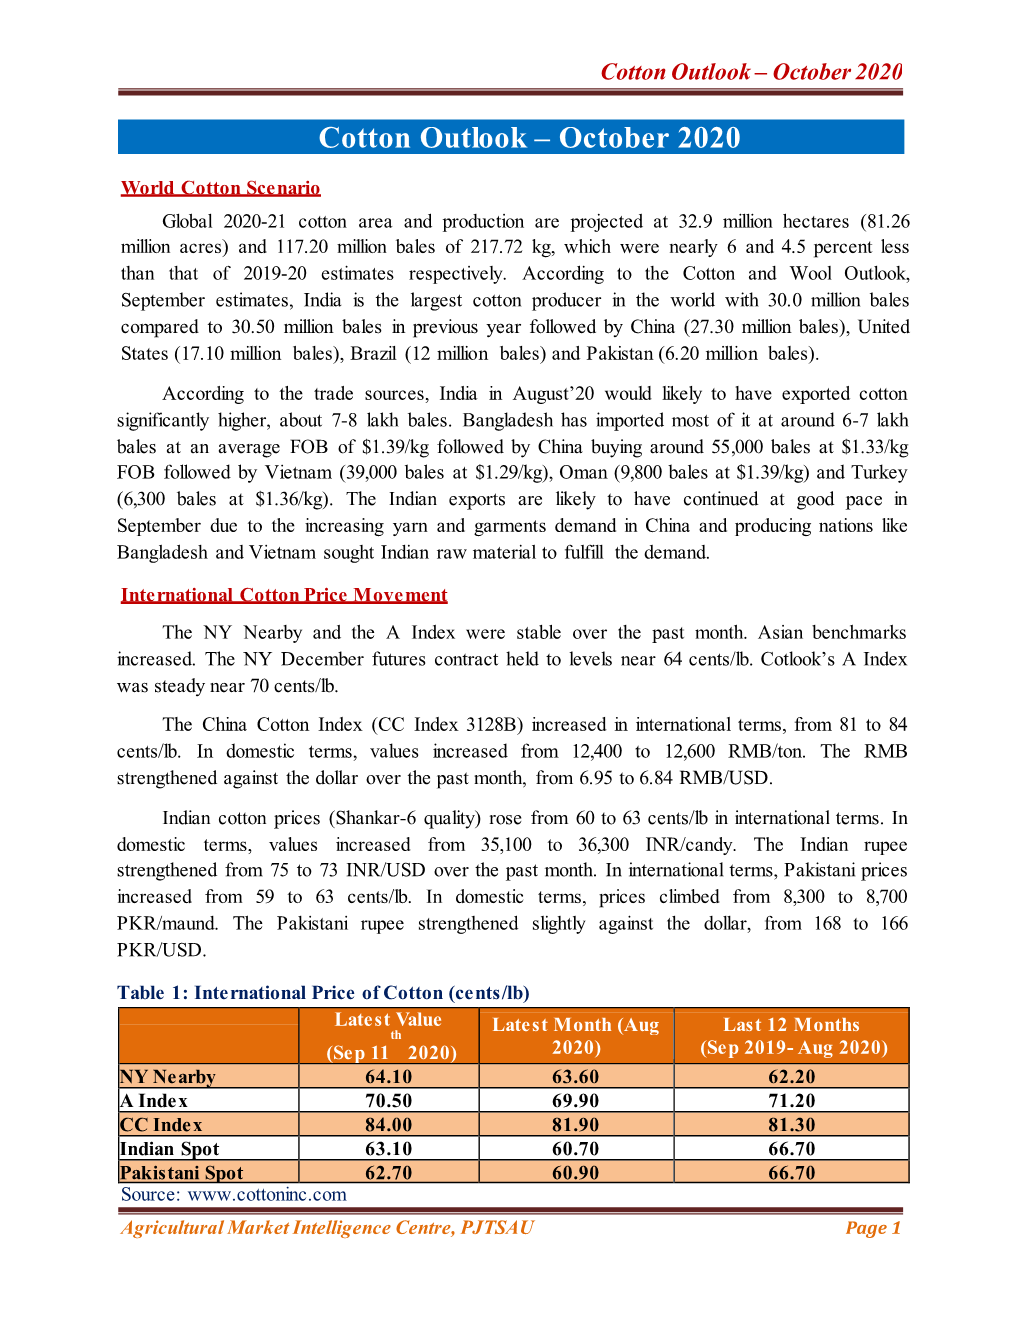 Cotton Outlook October 2020